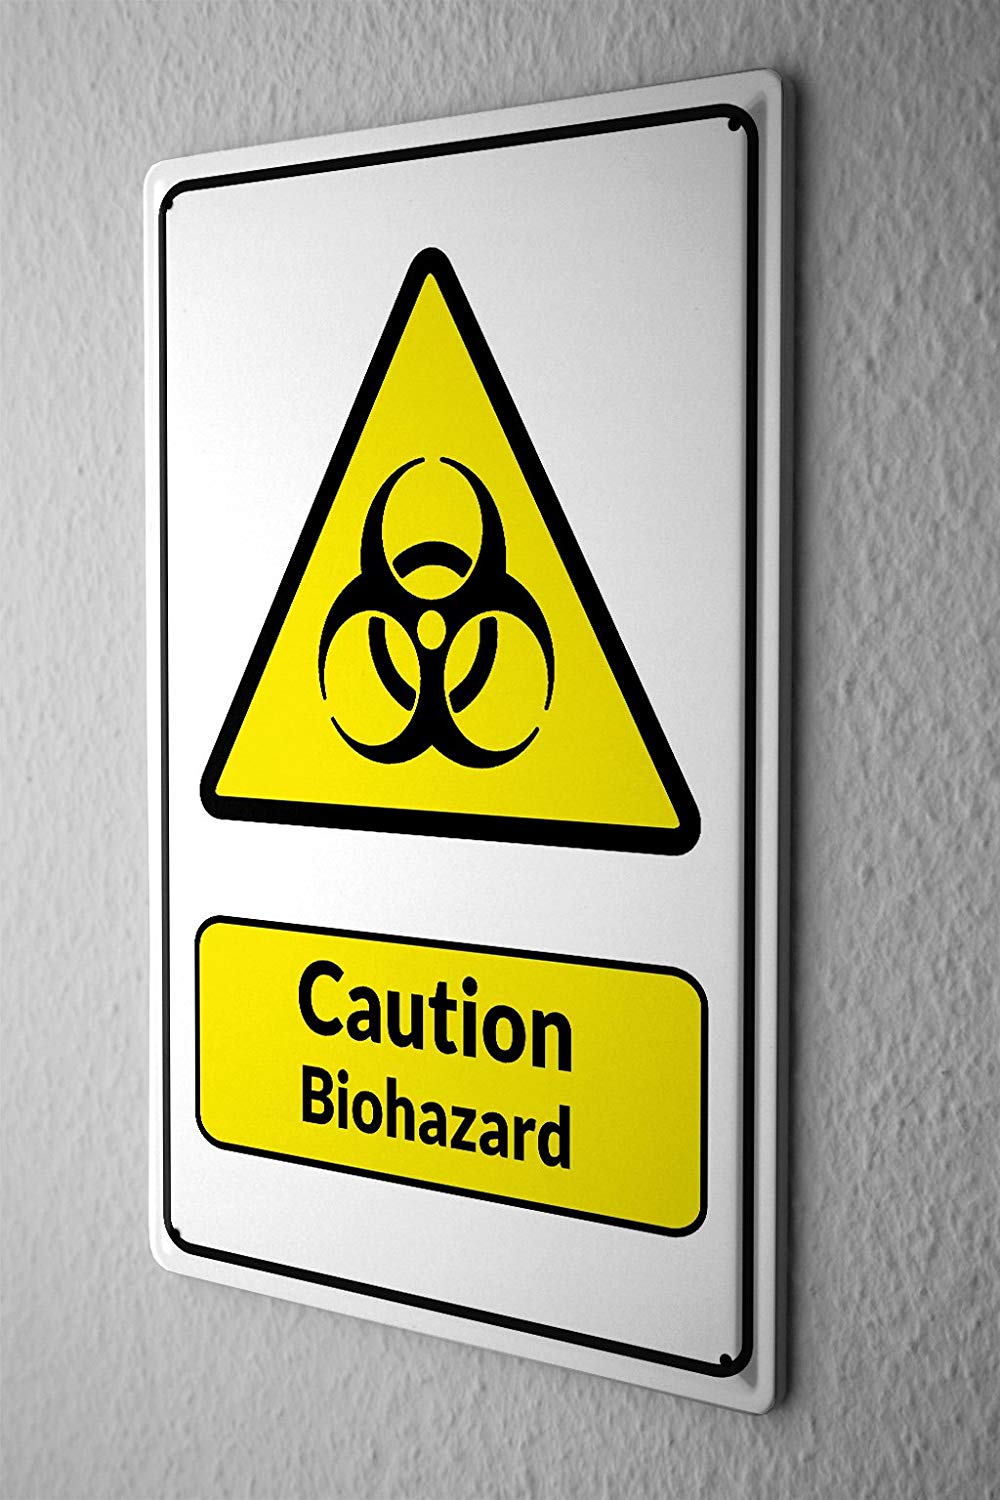 Yellow Triangle Logo - Tin Sign Warning Sign Caution Biohazard symbol in black and yellow